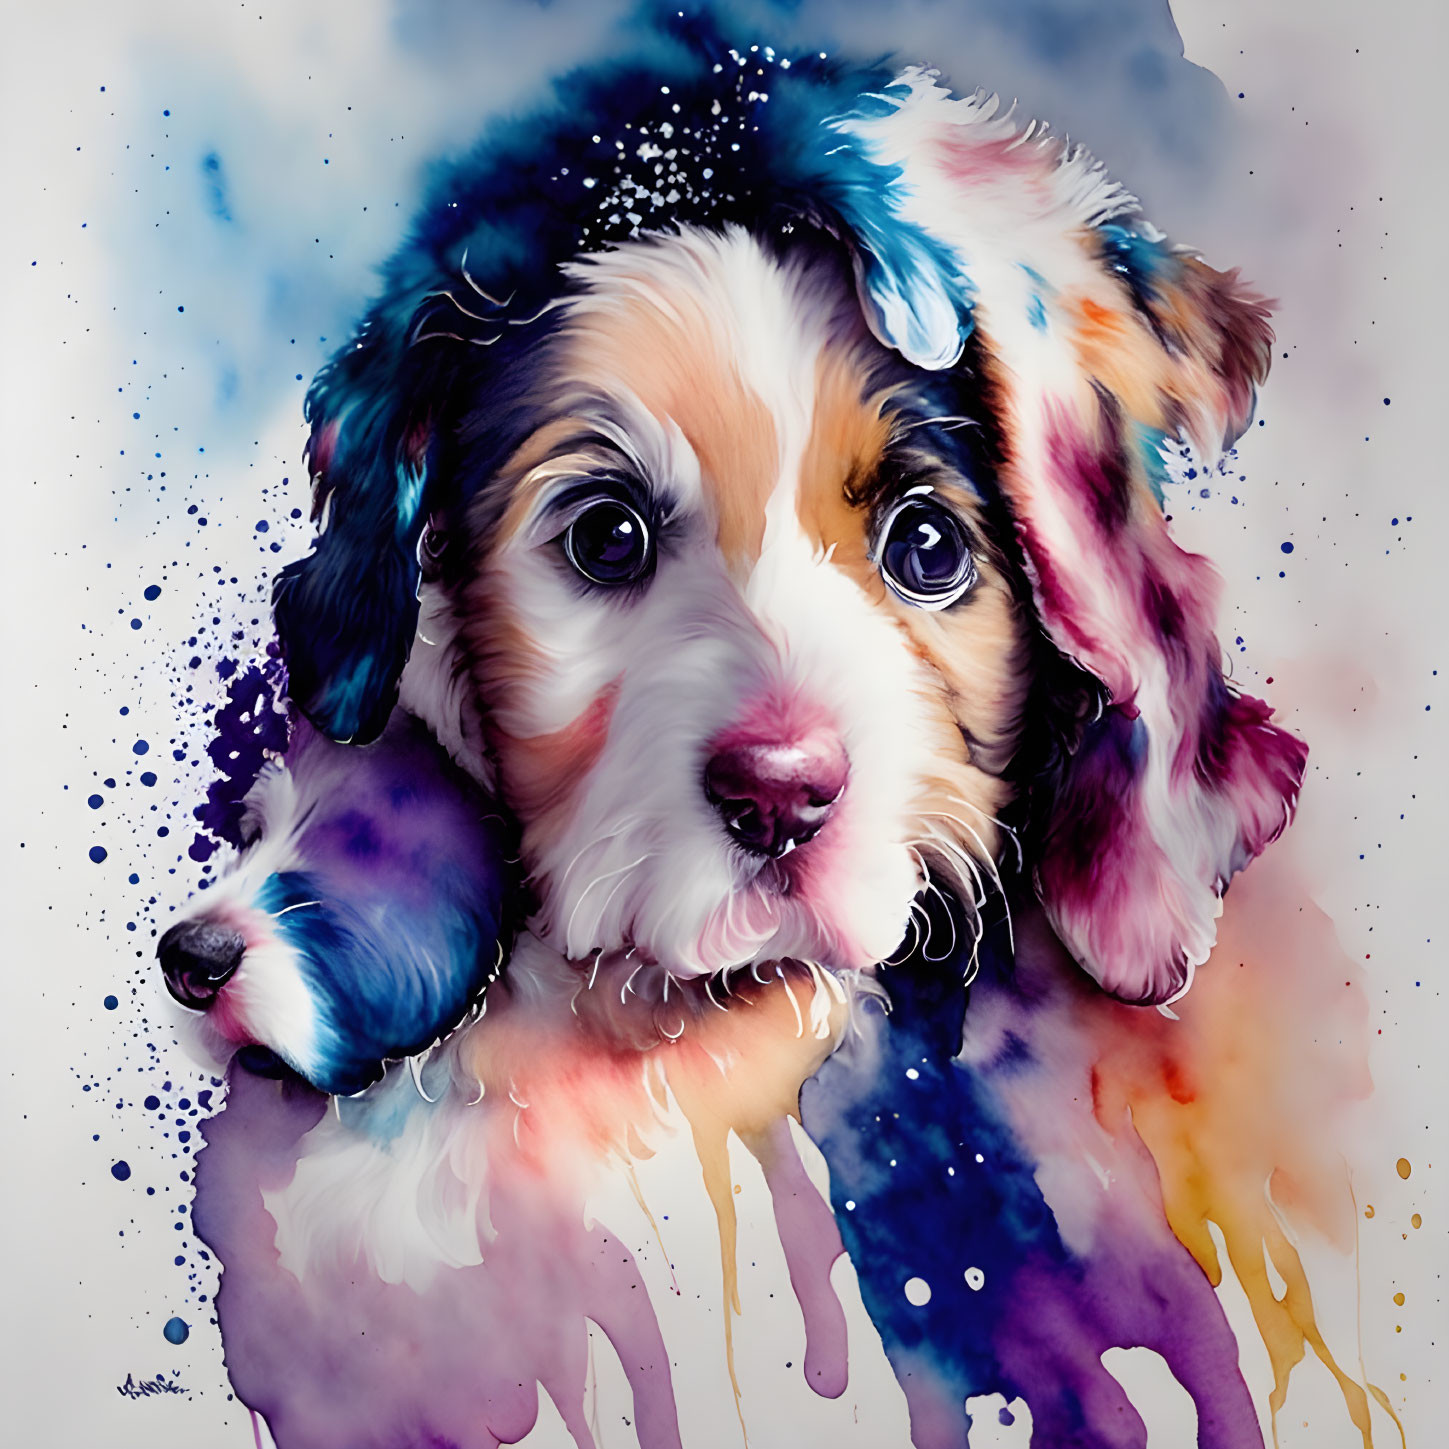 Colorful Watercolor Painting of Adorable Puppy with Large Eyes